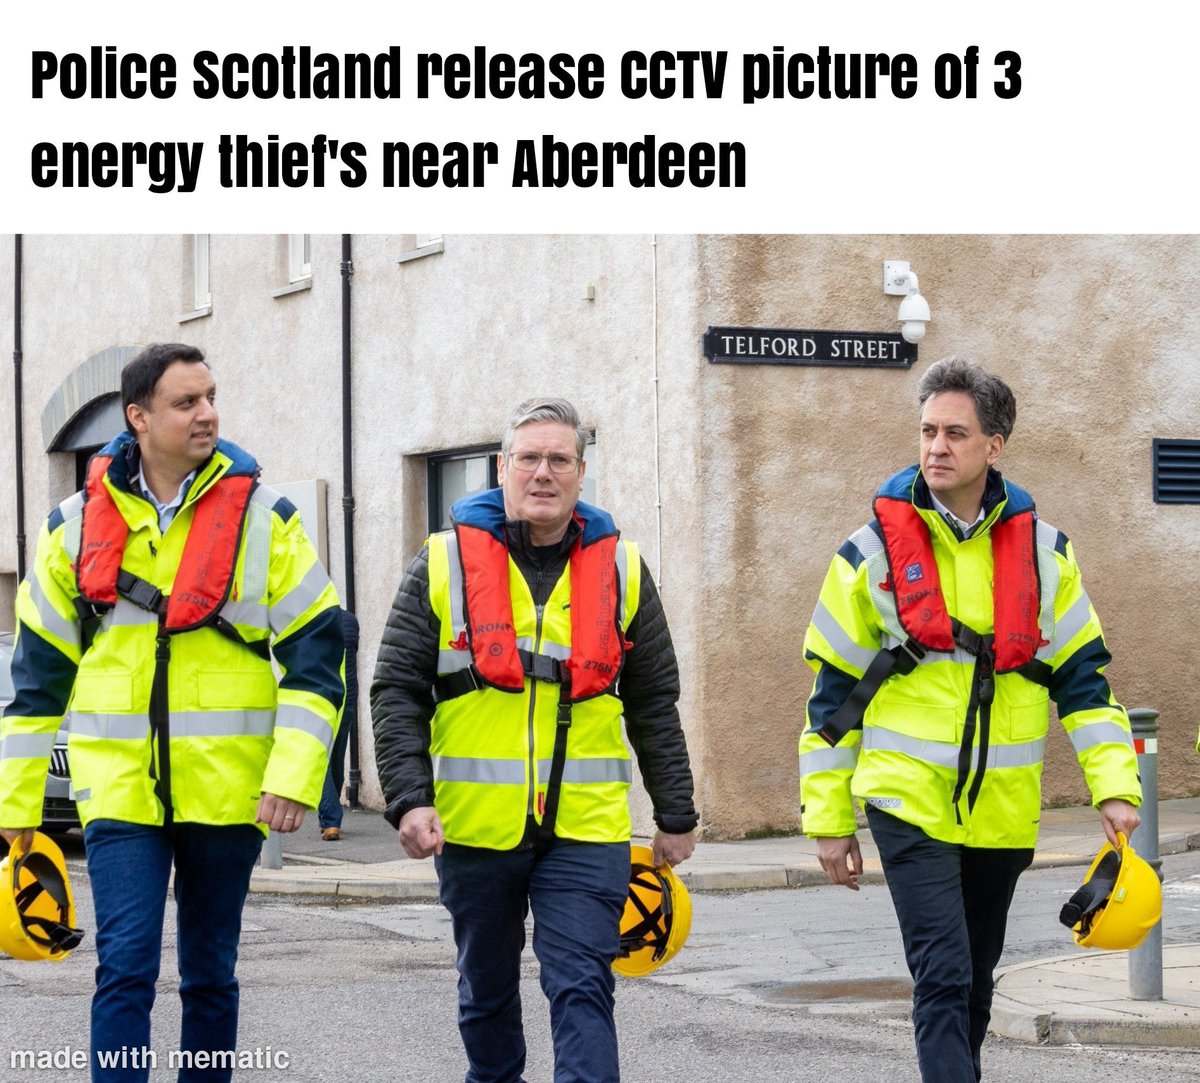 @AnasSarwar @Keir_Starmer Labour’s alternative 5 missions.

Rather than their latest pile of pish.

Take Scotland’s oil money to England 
Pipe Scottish water to England 
Fill Scottish hills with turbines to power England 
Fill Scottish seas with turbines to power England 
Give Scotland a token wee office